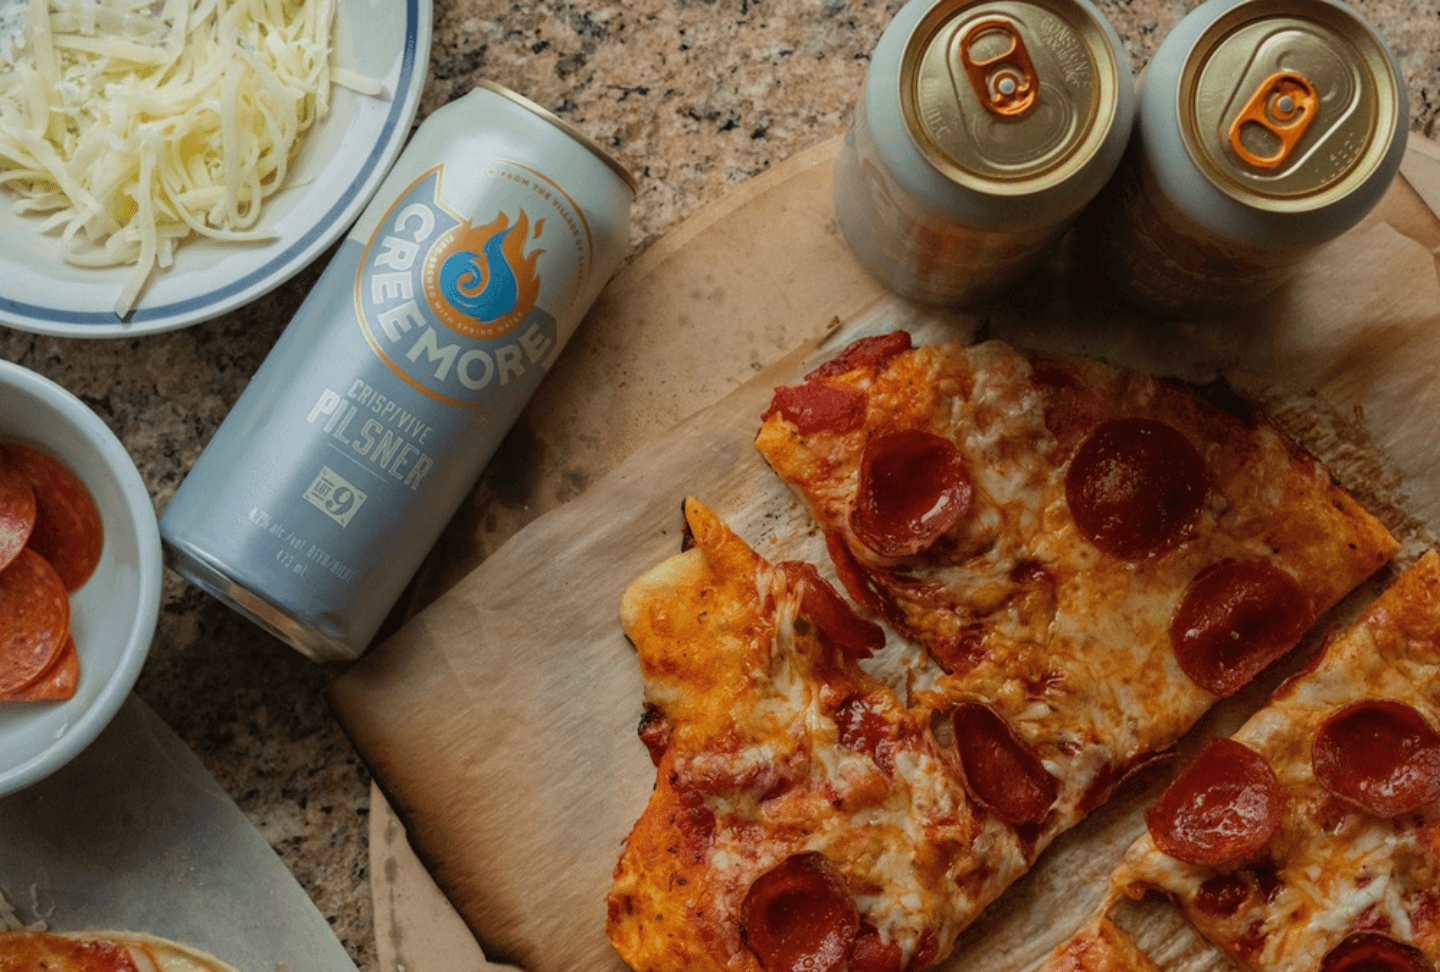 creemore beer can next to slices of pizza